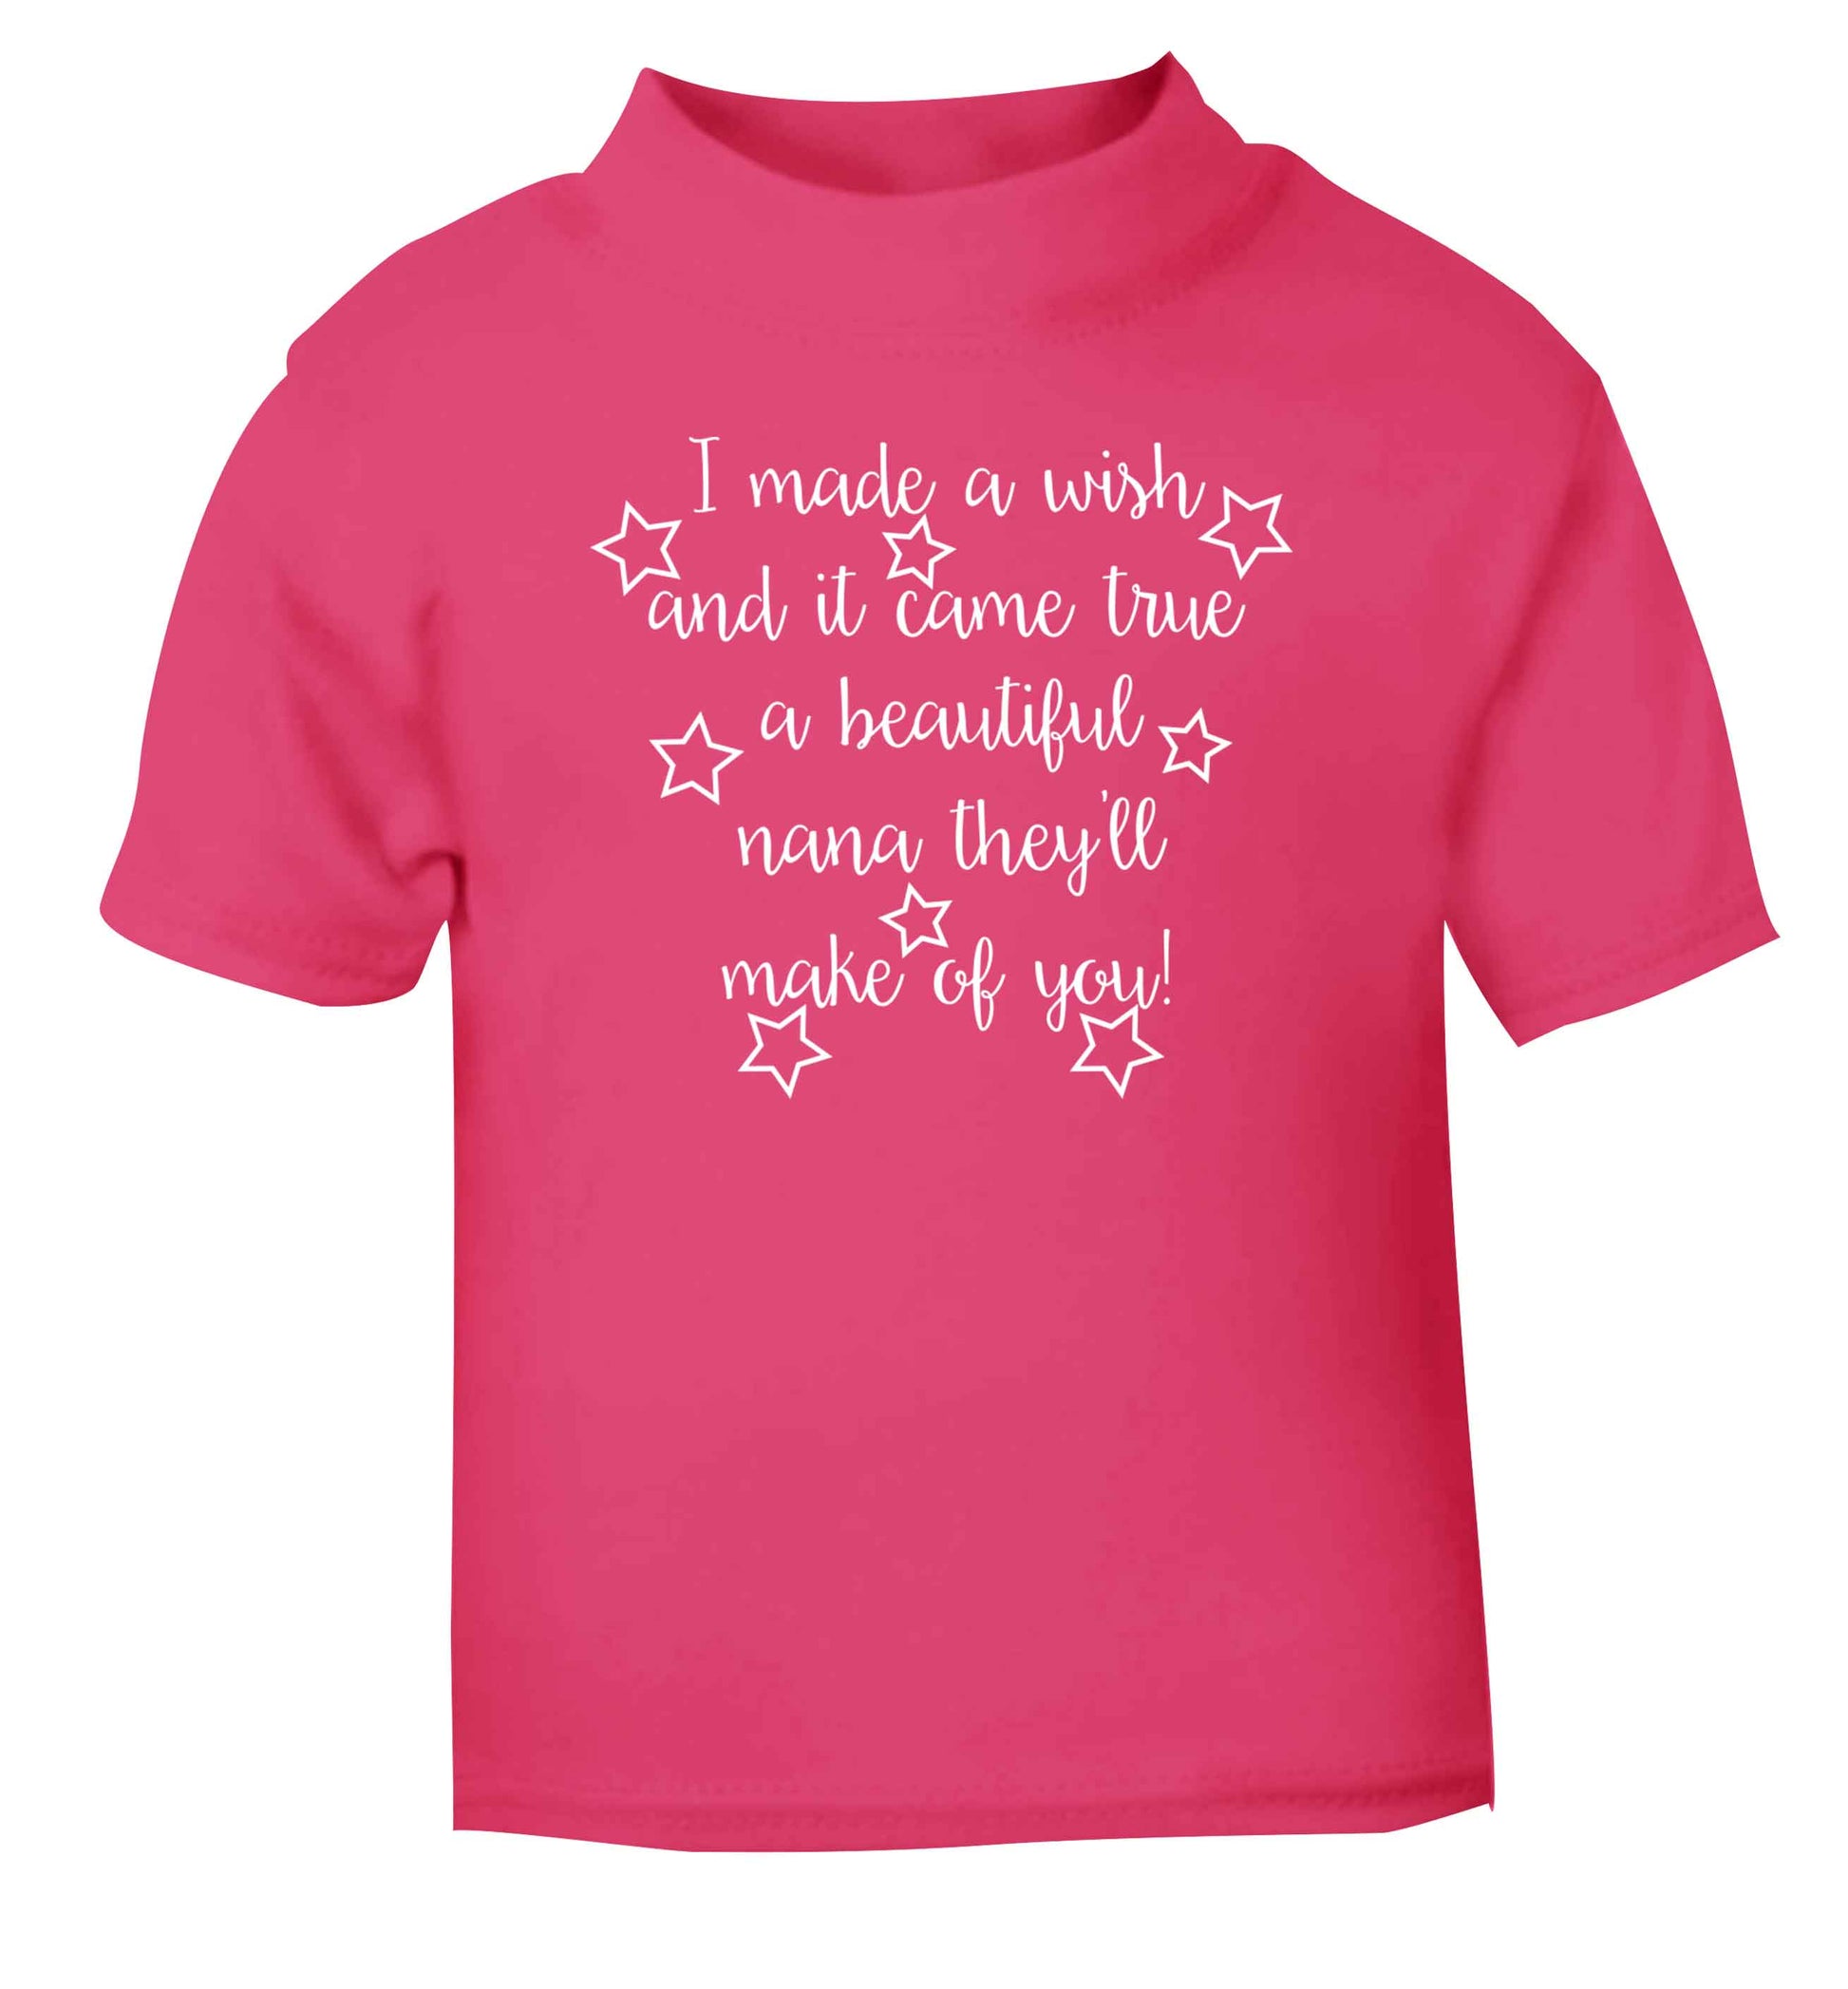 I made a wish and it came true a beautiful nana they'll make of you! pink Baby Toddler Tshirt 2 Years